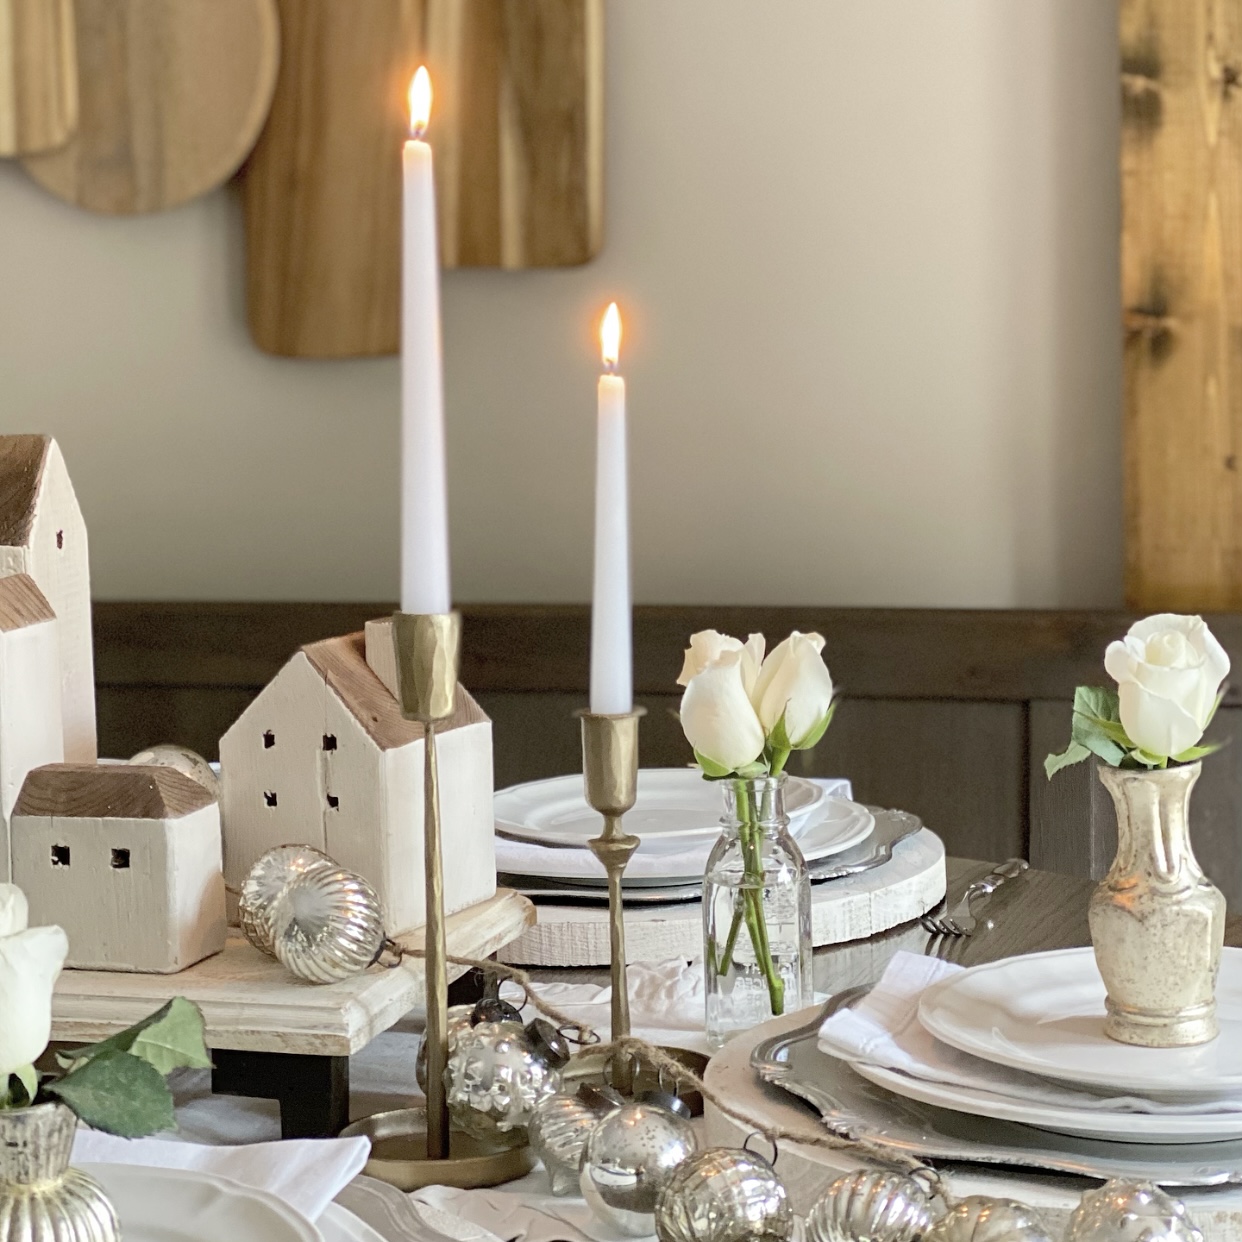 A neutral holiday tablescape with taper candles burning in brass candlesticks, white roses in mercury glass bud vases on each place setting, and reclaimed wood houses in the center of the table.